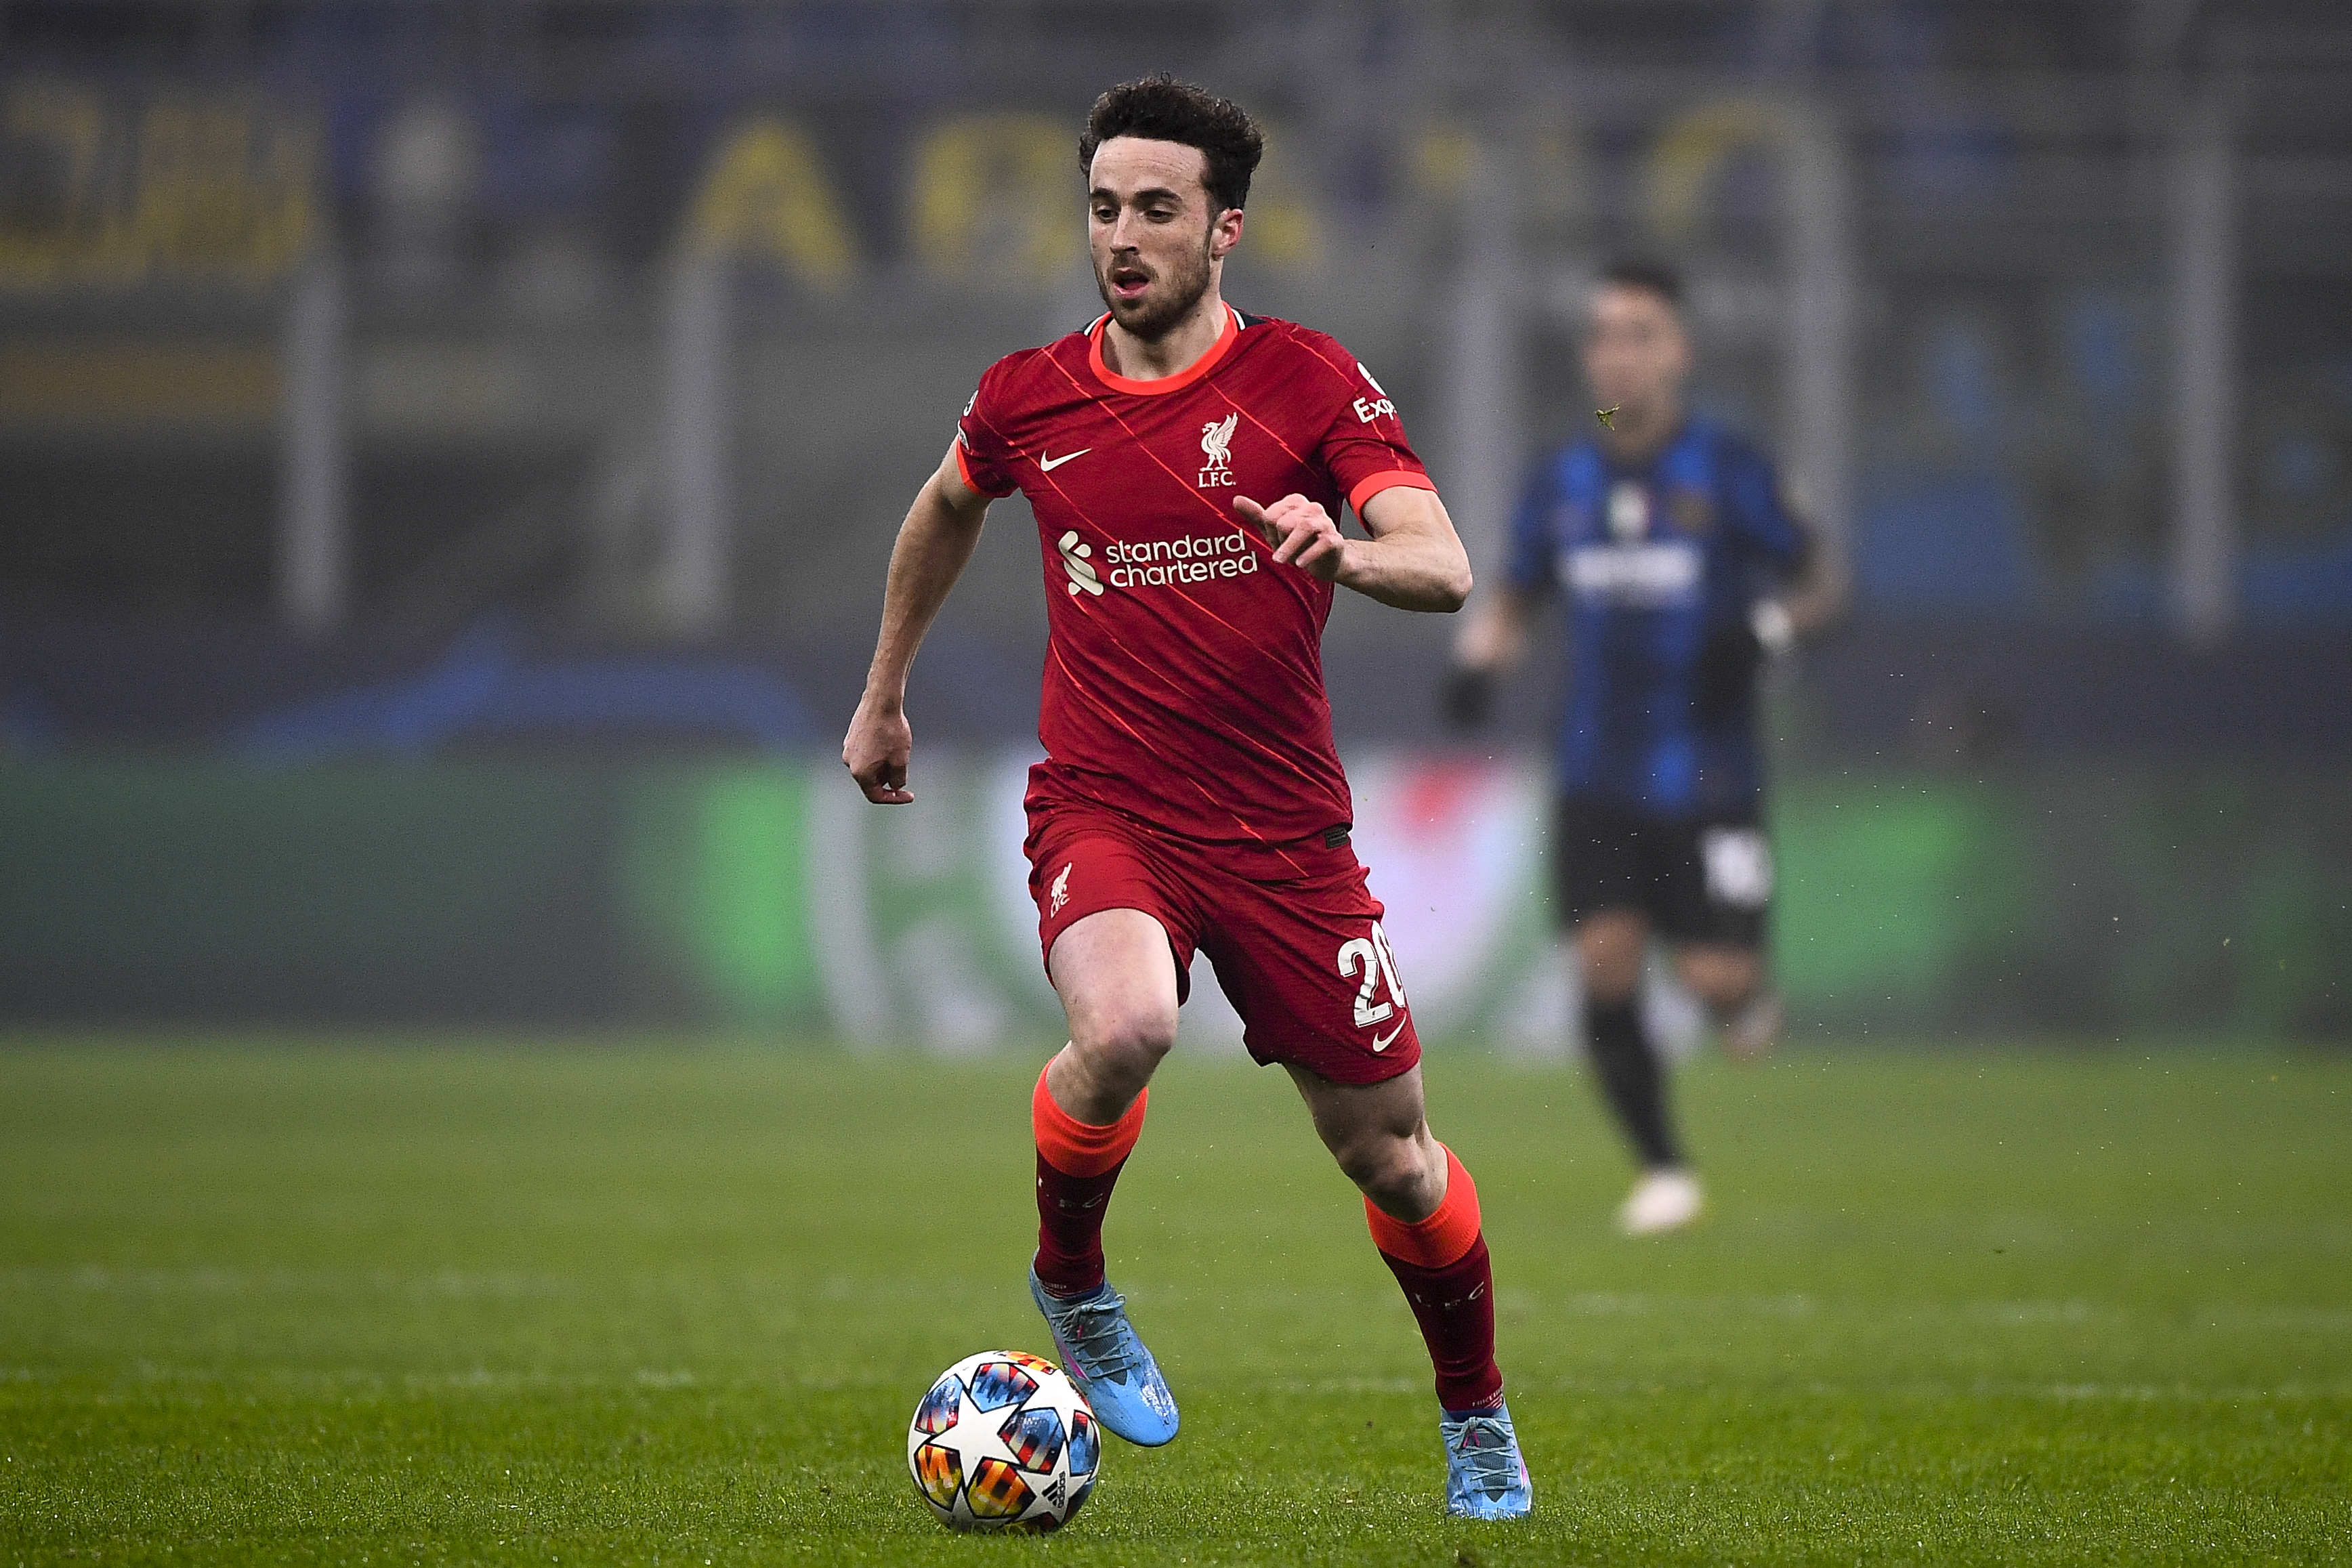 Diogo Jota of Liverpool FC in action during the UEFA Champions League round of sixteen first leg football match between FC Internazionale and Liverpool FC. Liverpool FC won 2-0 over FC Internazionale.